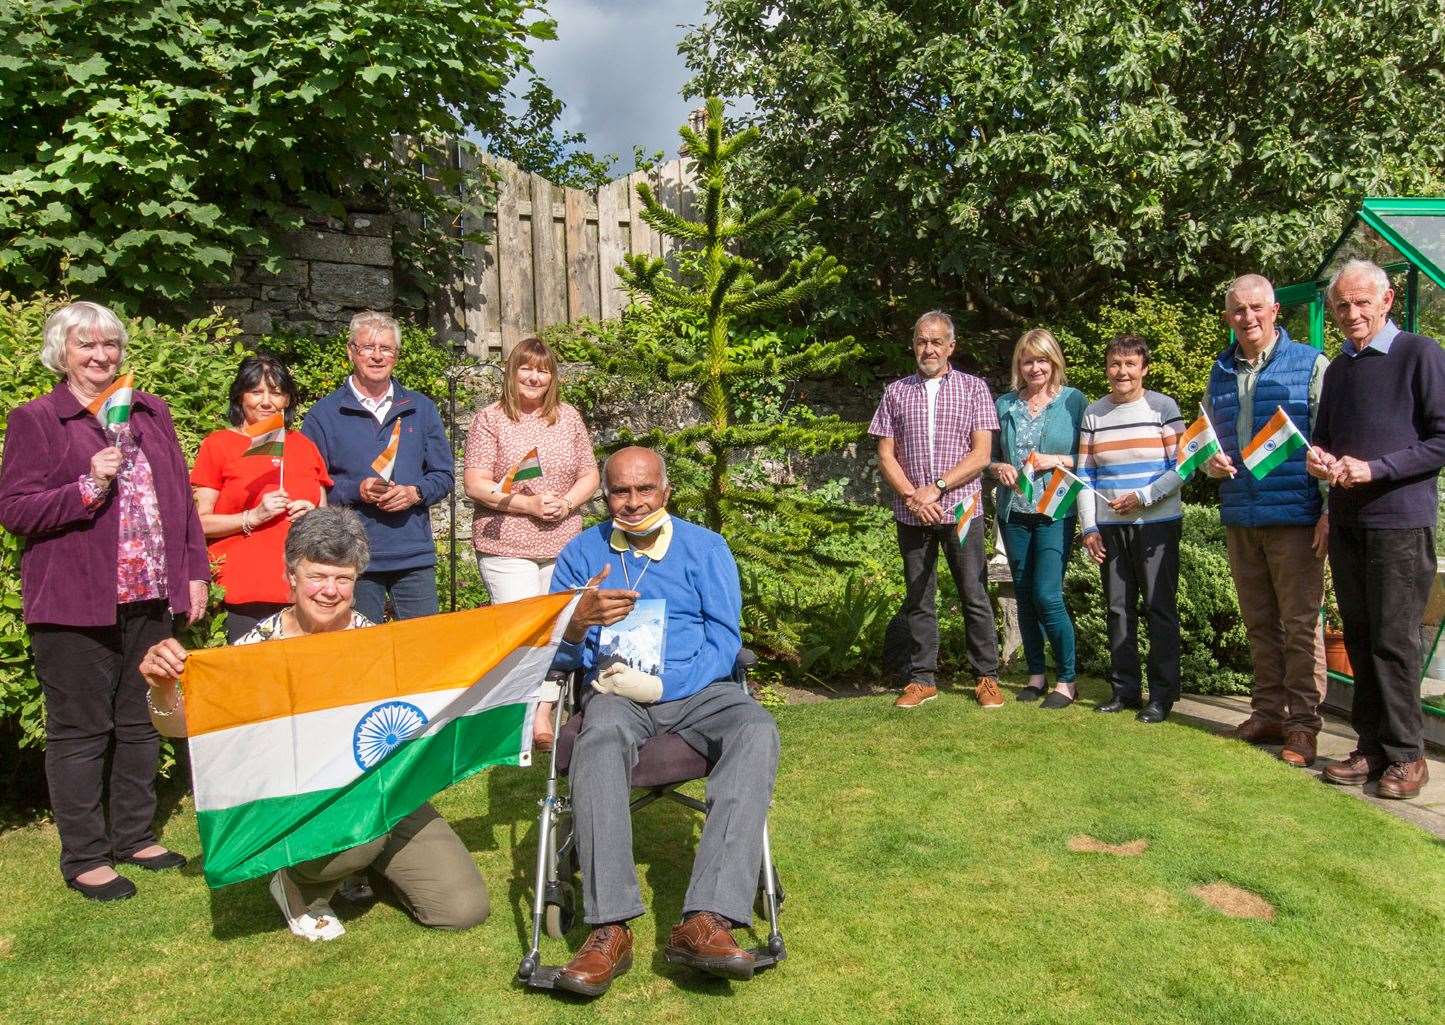 Pradip Datta marked India Independence Day in 2021 with a garden party for friends at his home in Wick. Picture: Robert MacDonald / Northern Studios